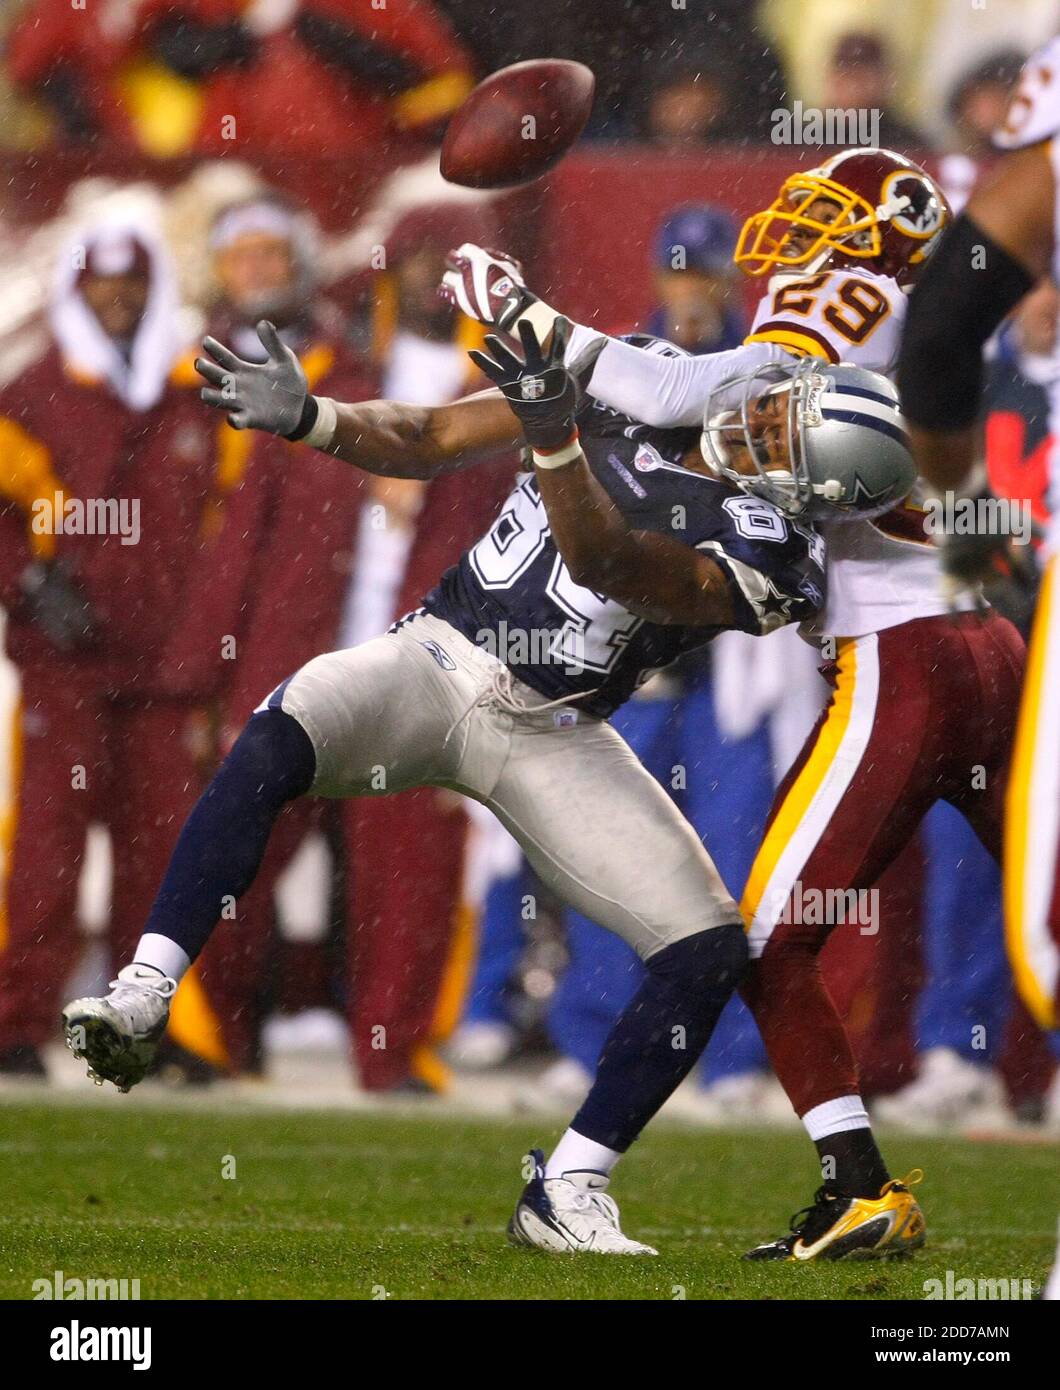 Washington Redskins corner back Leigh Torrence breaks up a pass intended for Dallas Cowboys' wide receiver Patrick Crayton in the first quarter as the Dallas Cowboys faced the Washington Redskins at FedEx Field in Landover, MD, USA on December 30, 2007. Photo by Harry E. Walker/MCT/Cameleon/ABACAPRESS.COM Stock Photo